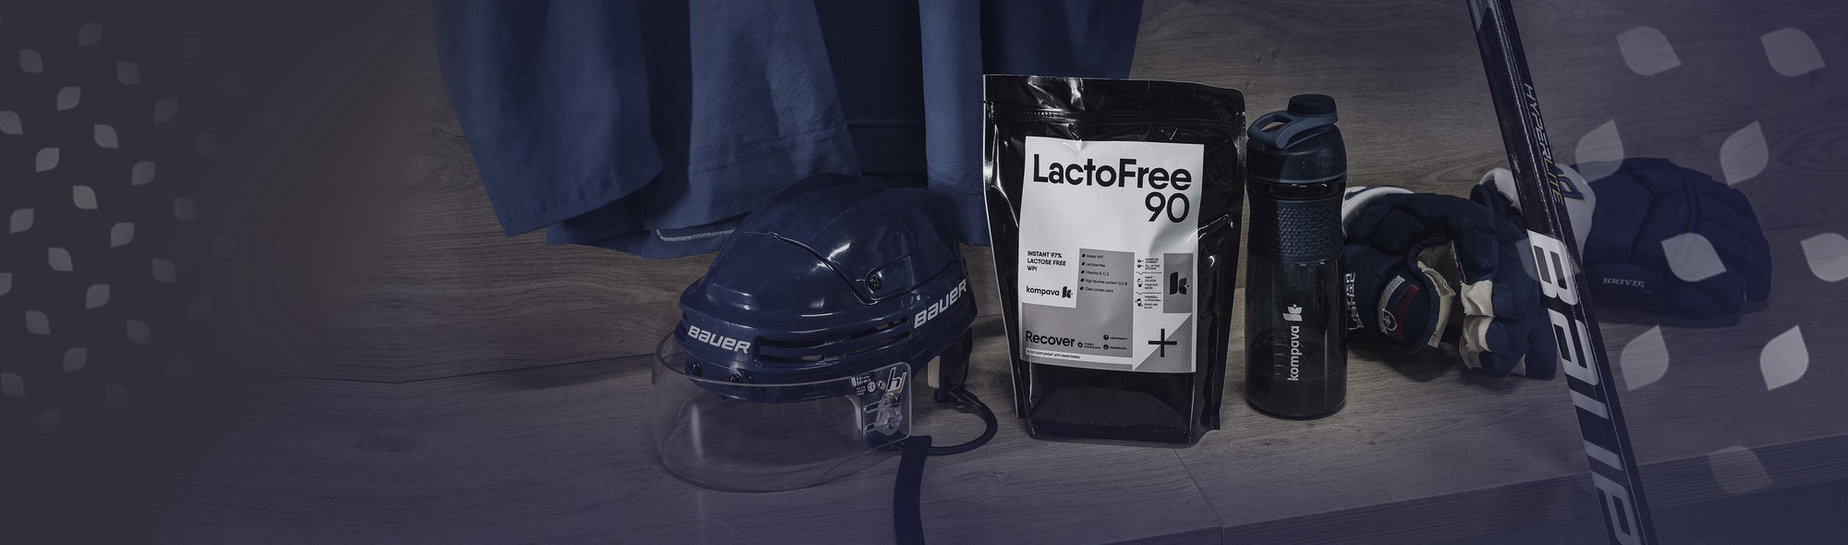 Lactose-free proteins